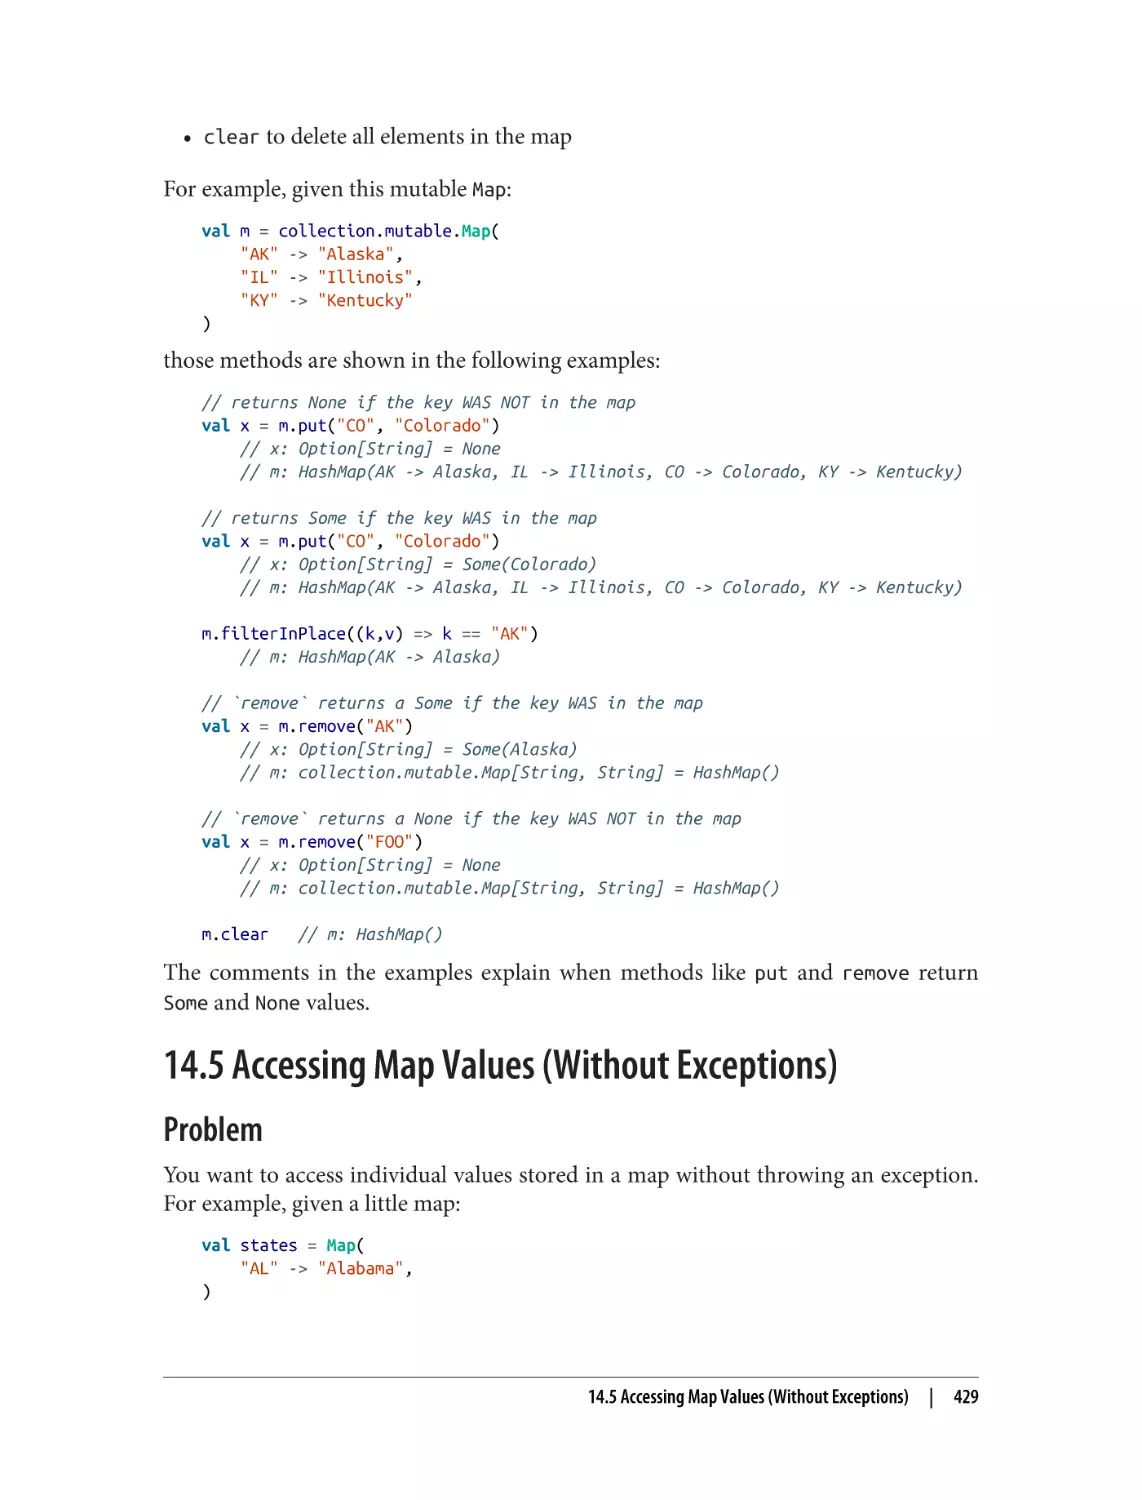 14.5 Accessing Map Values (Without Exceptions)
Problem